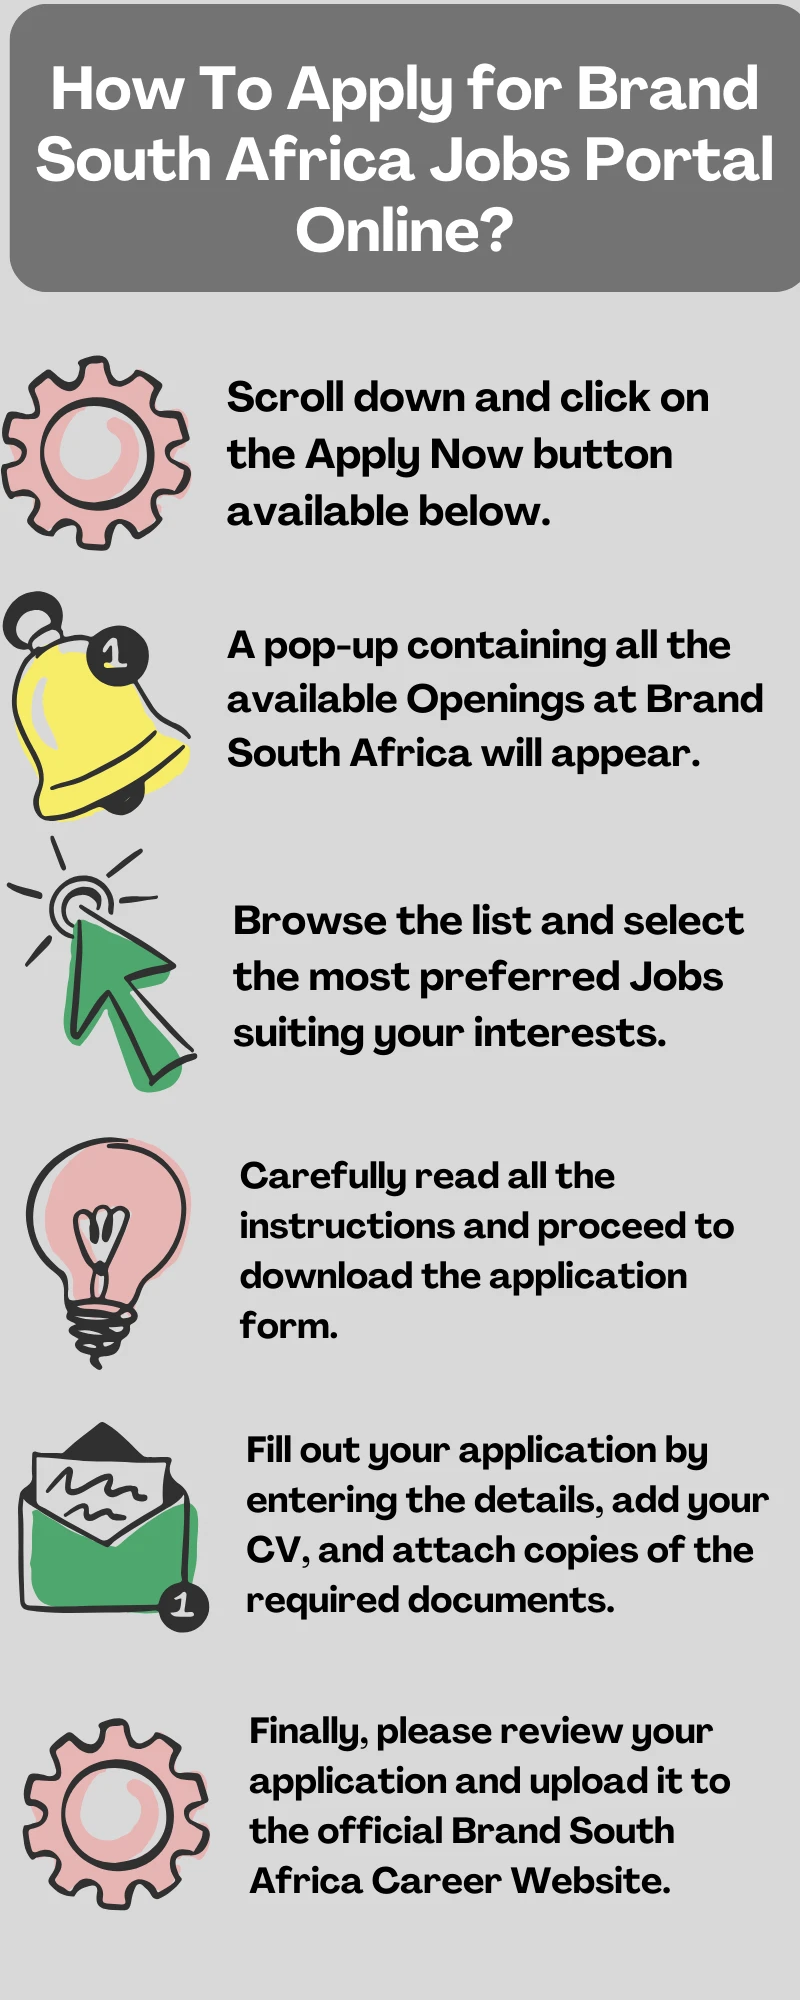 How To Apply for Brand South Africa Jobs Portal Online?